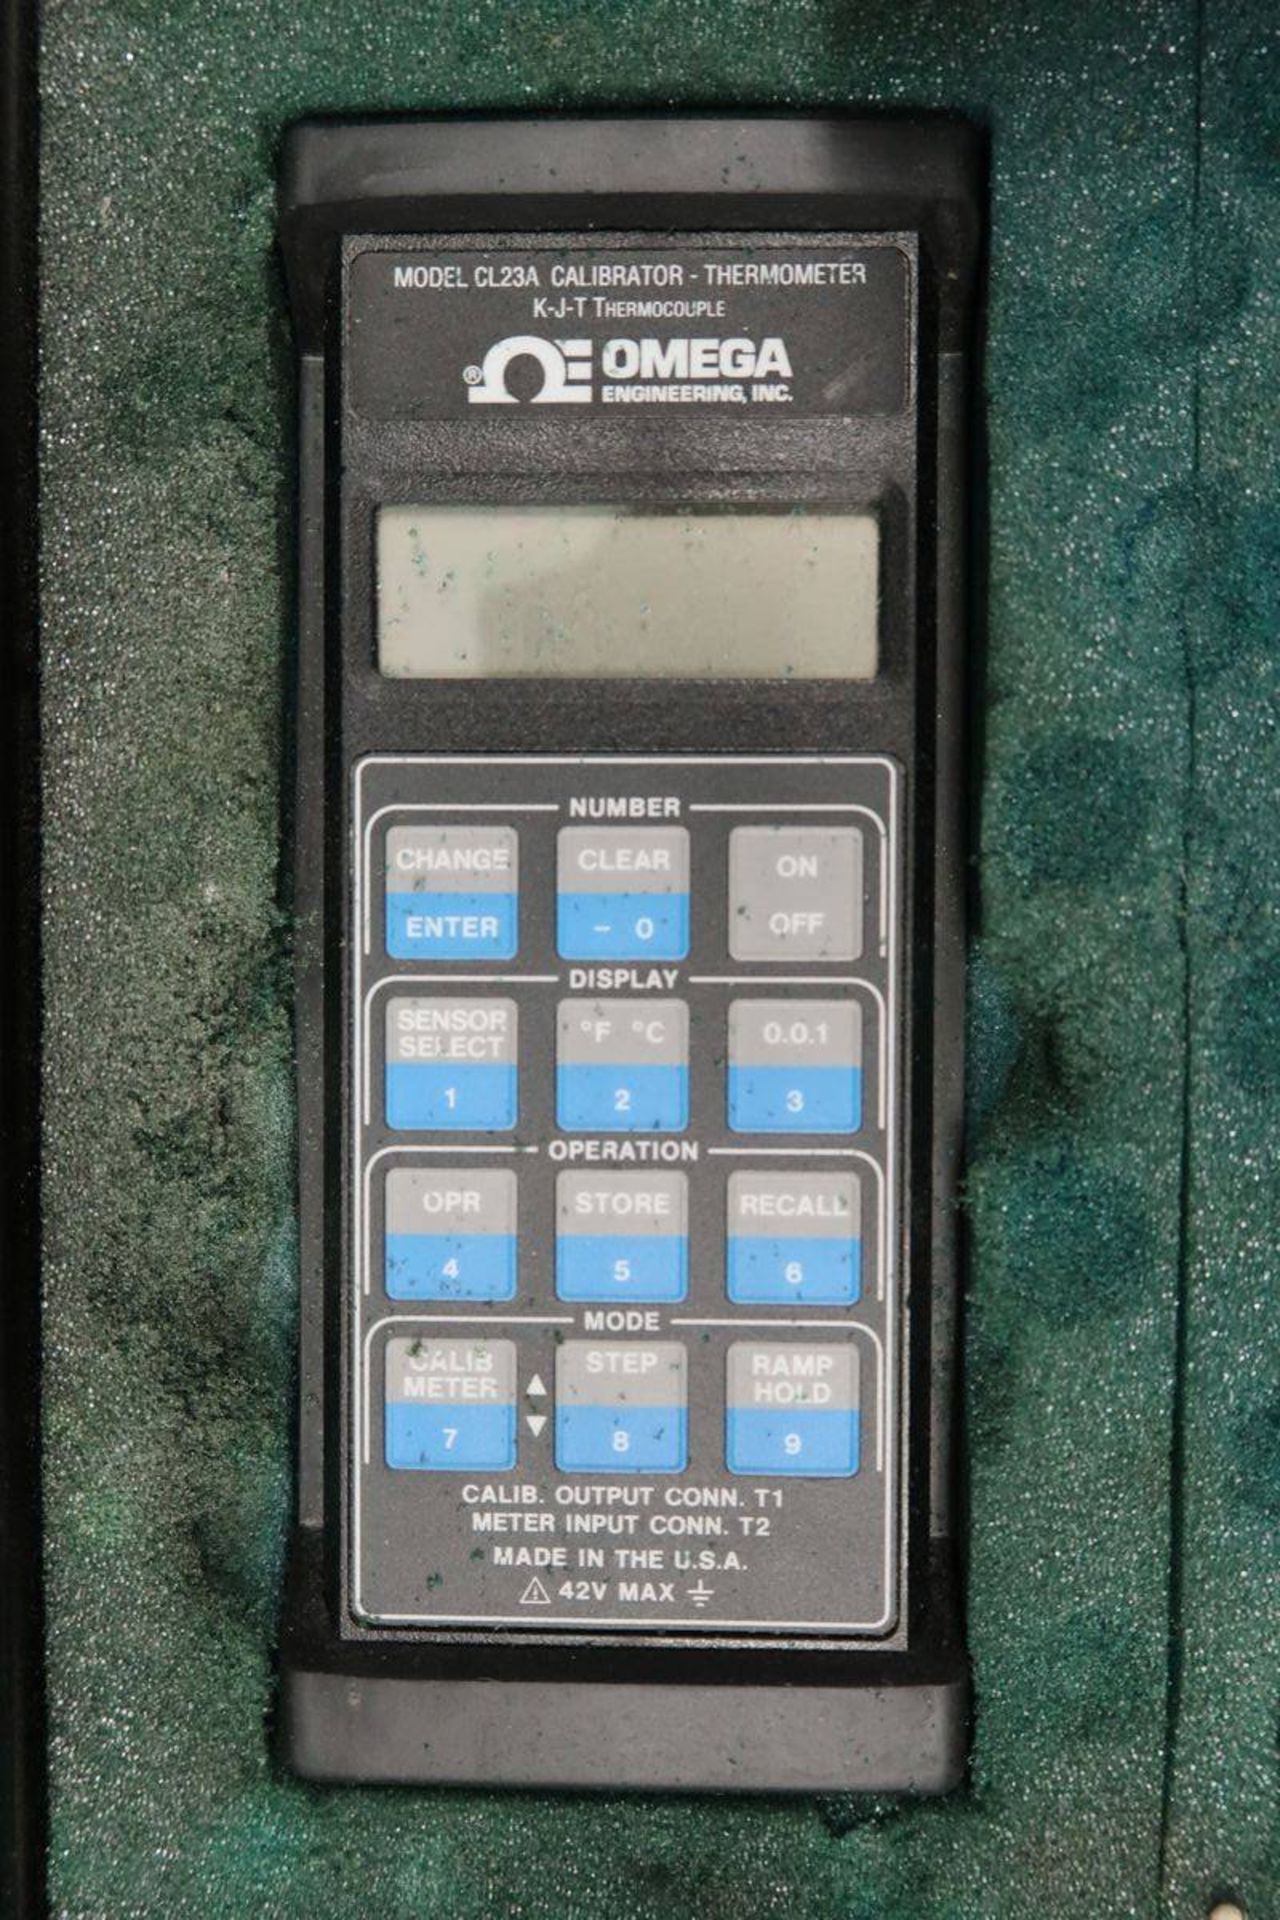 Omega Engineering CL23A Type K-J-T Thermocoupler Calibrator/Thermometer - Image 2 of 3